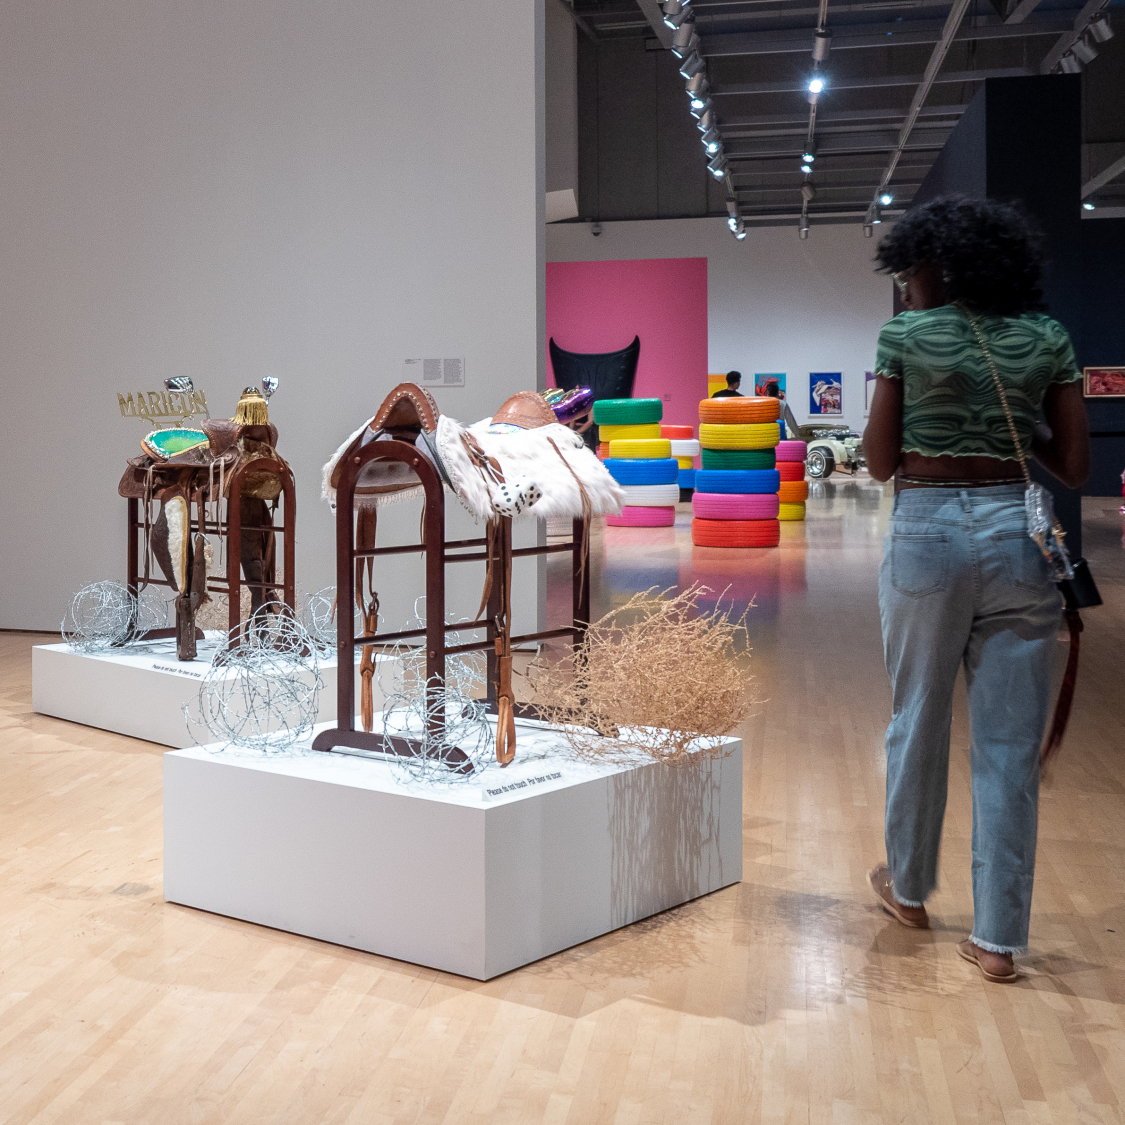 Desert Rider 🏜️🚗🛹 /// Closing this Sunday, don’t miss your last chance to experience the artistic and sociopolitical expressions of custom-ride culture, and its influence on Latinx and Indigenous artists working in the Southwest. 🎟️ Info + tickets at phxart.org/desert-rider.